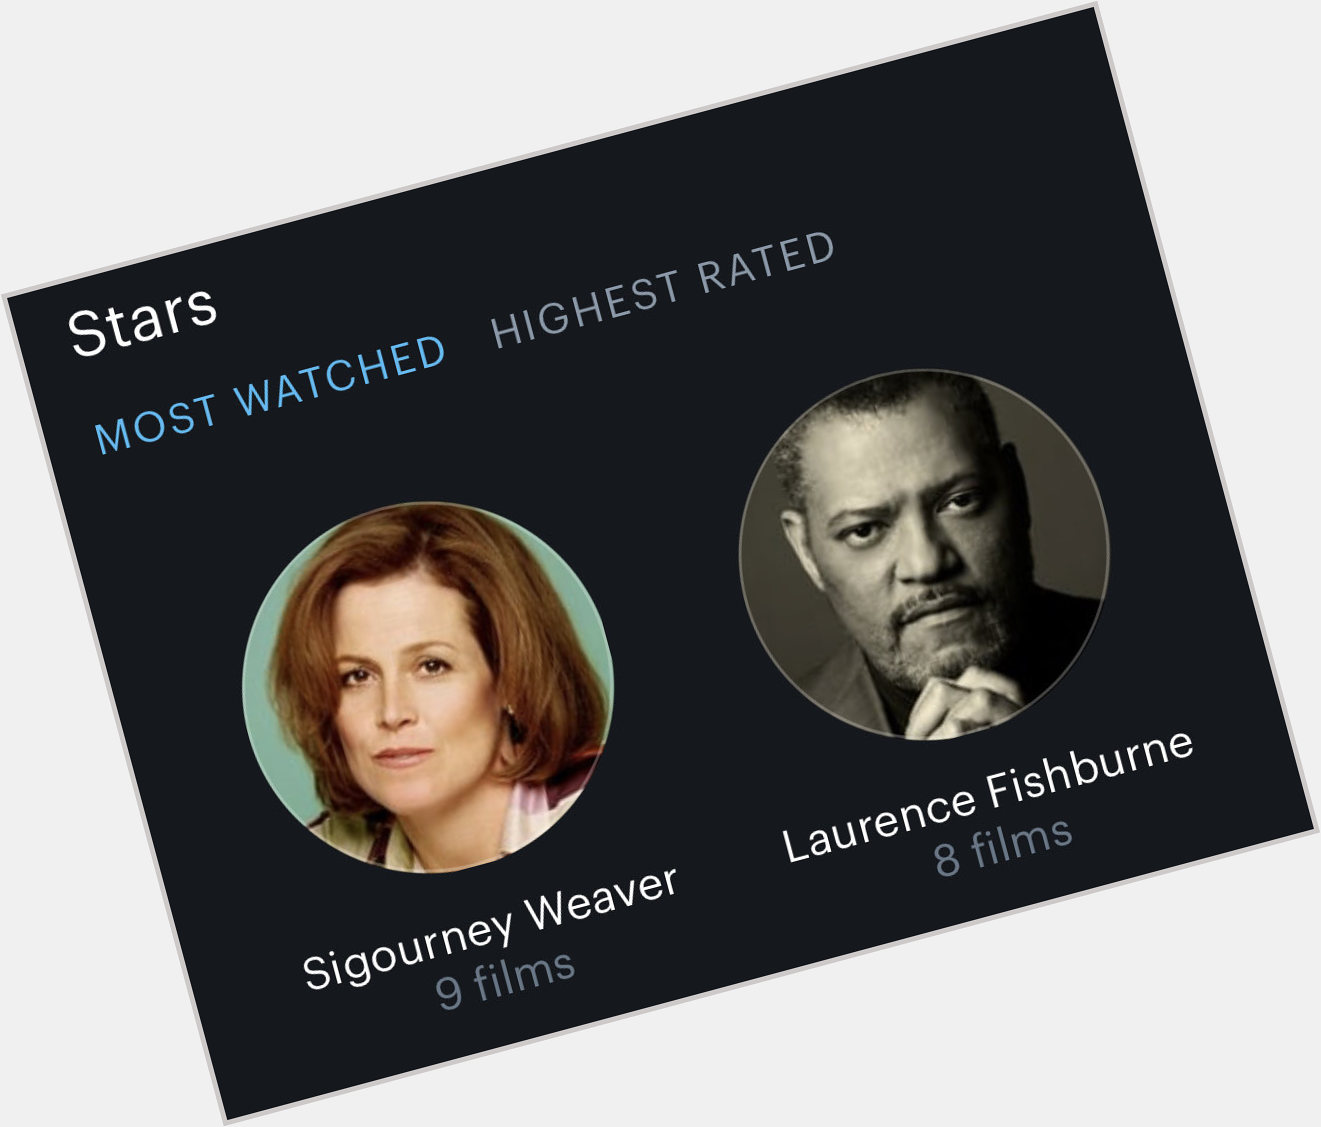 Happy Birthday to the legendary Sigourney Weaver, who also happens to be my most watched star on  